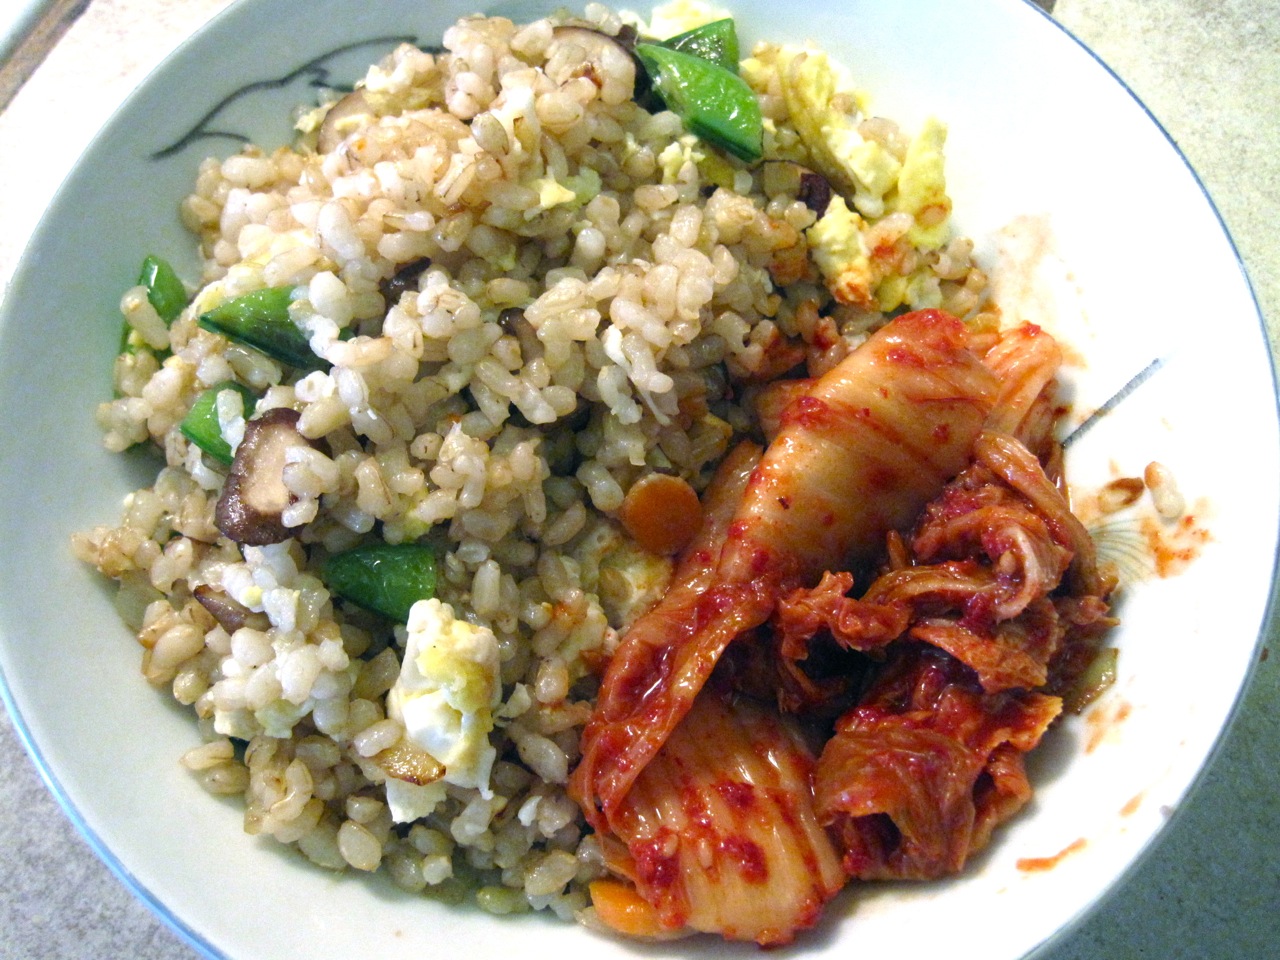 fried brown rice with fresh veggies and kimchi